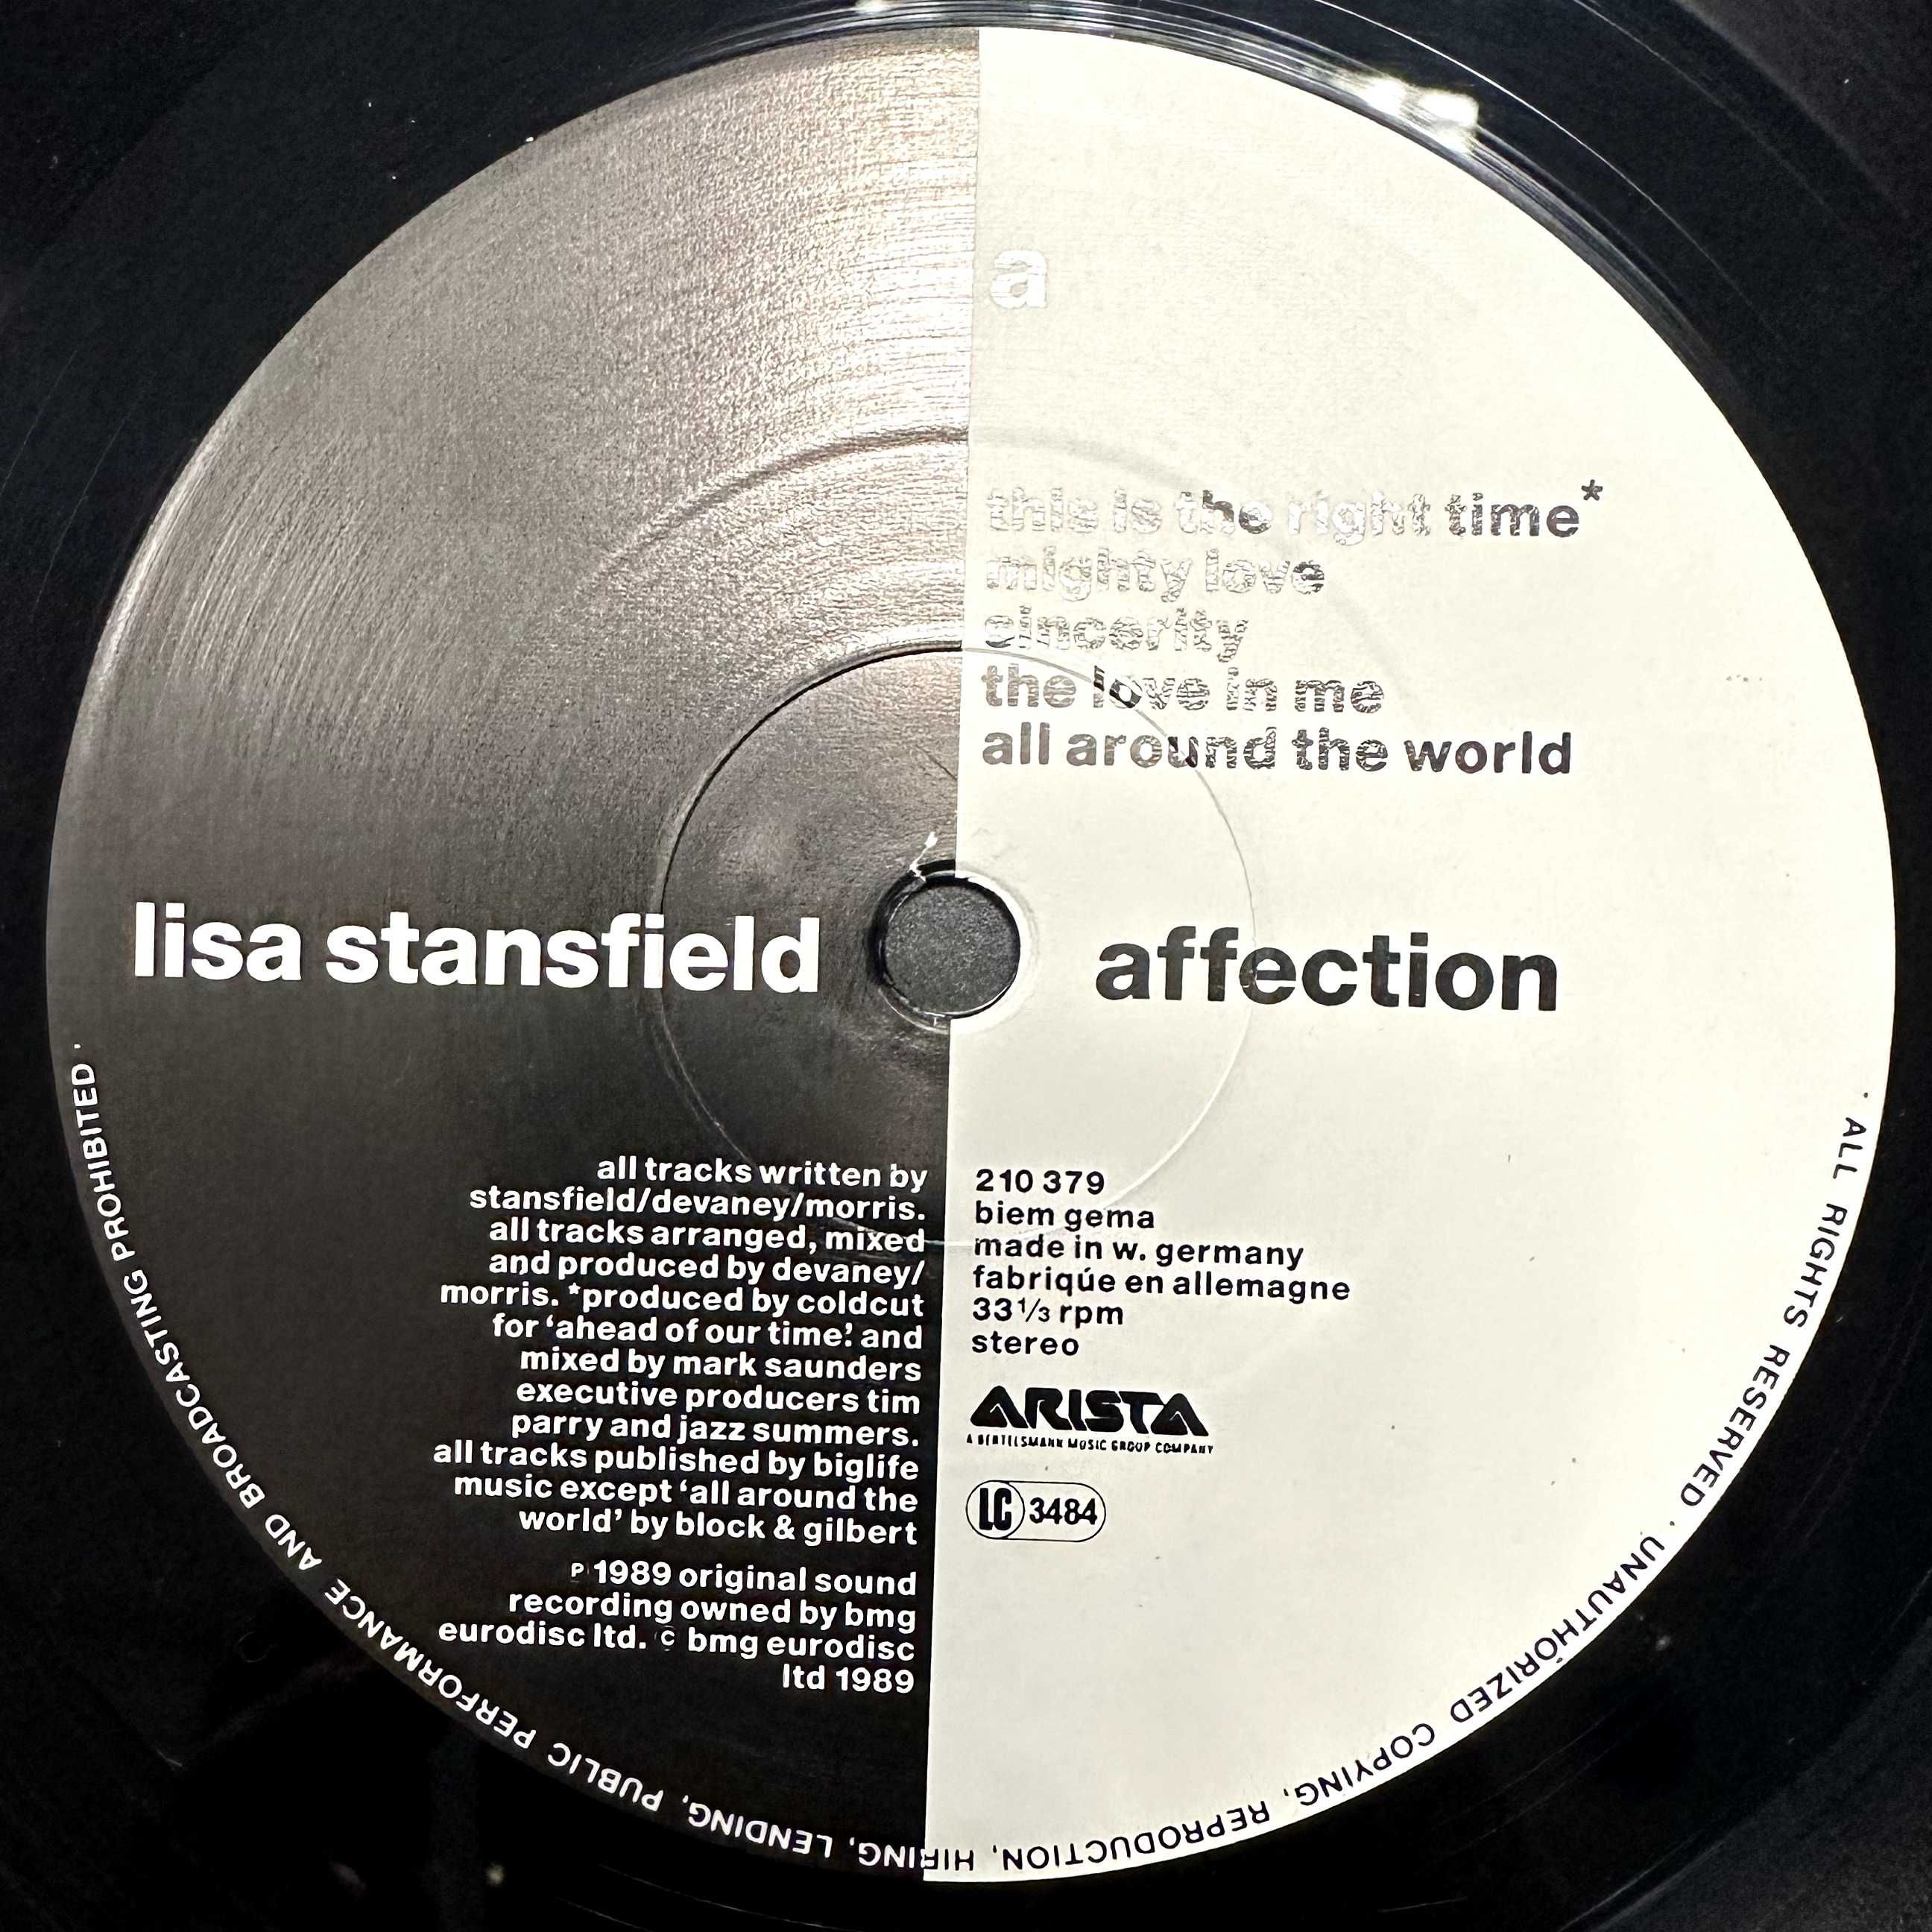 Lisa Stansfield - Affection (Vinyl, 1989, Europe)